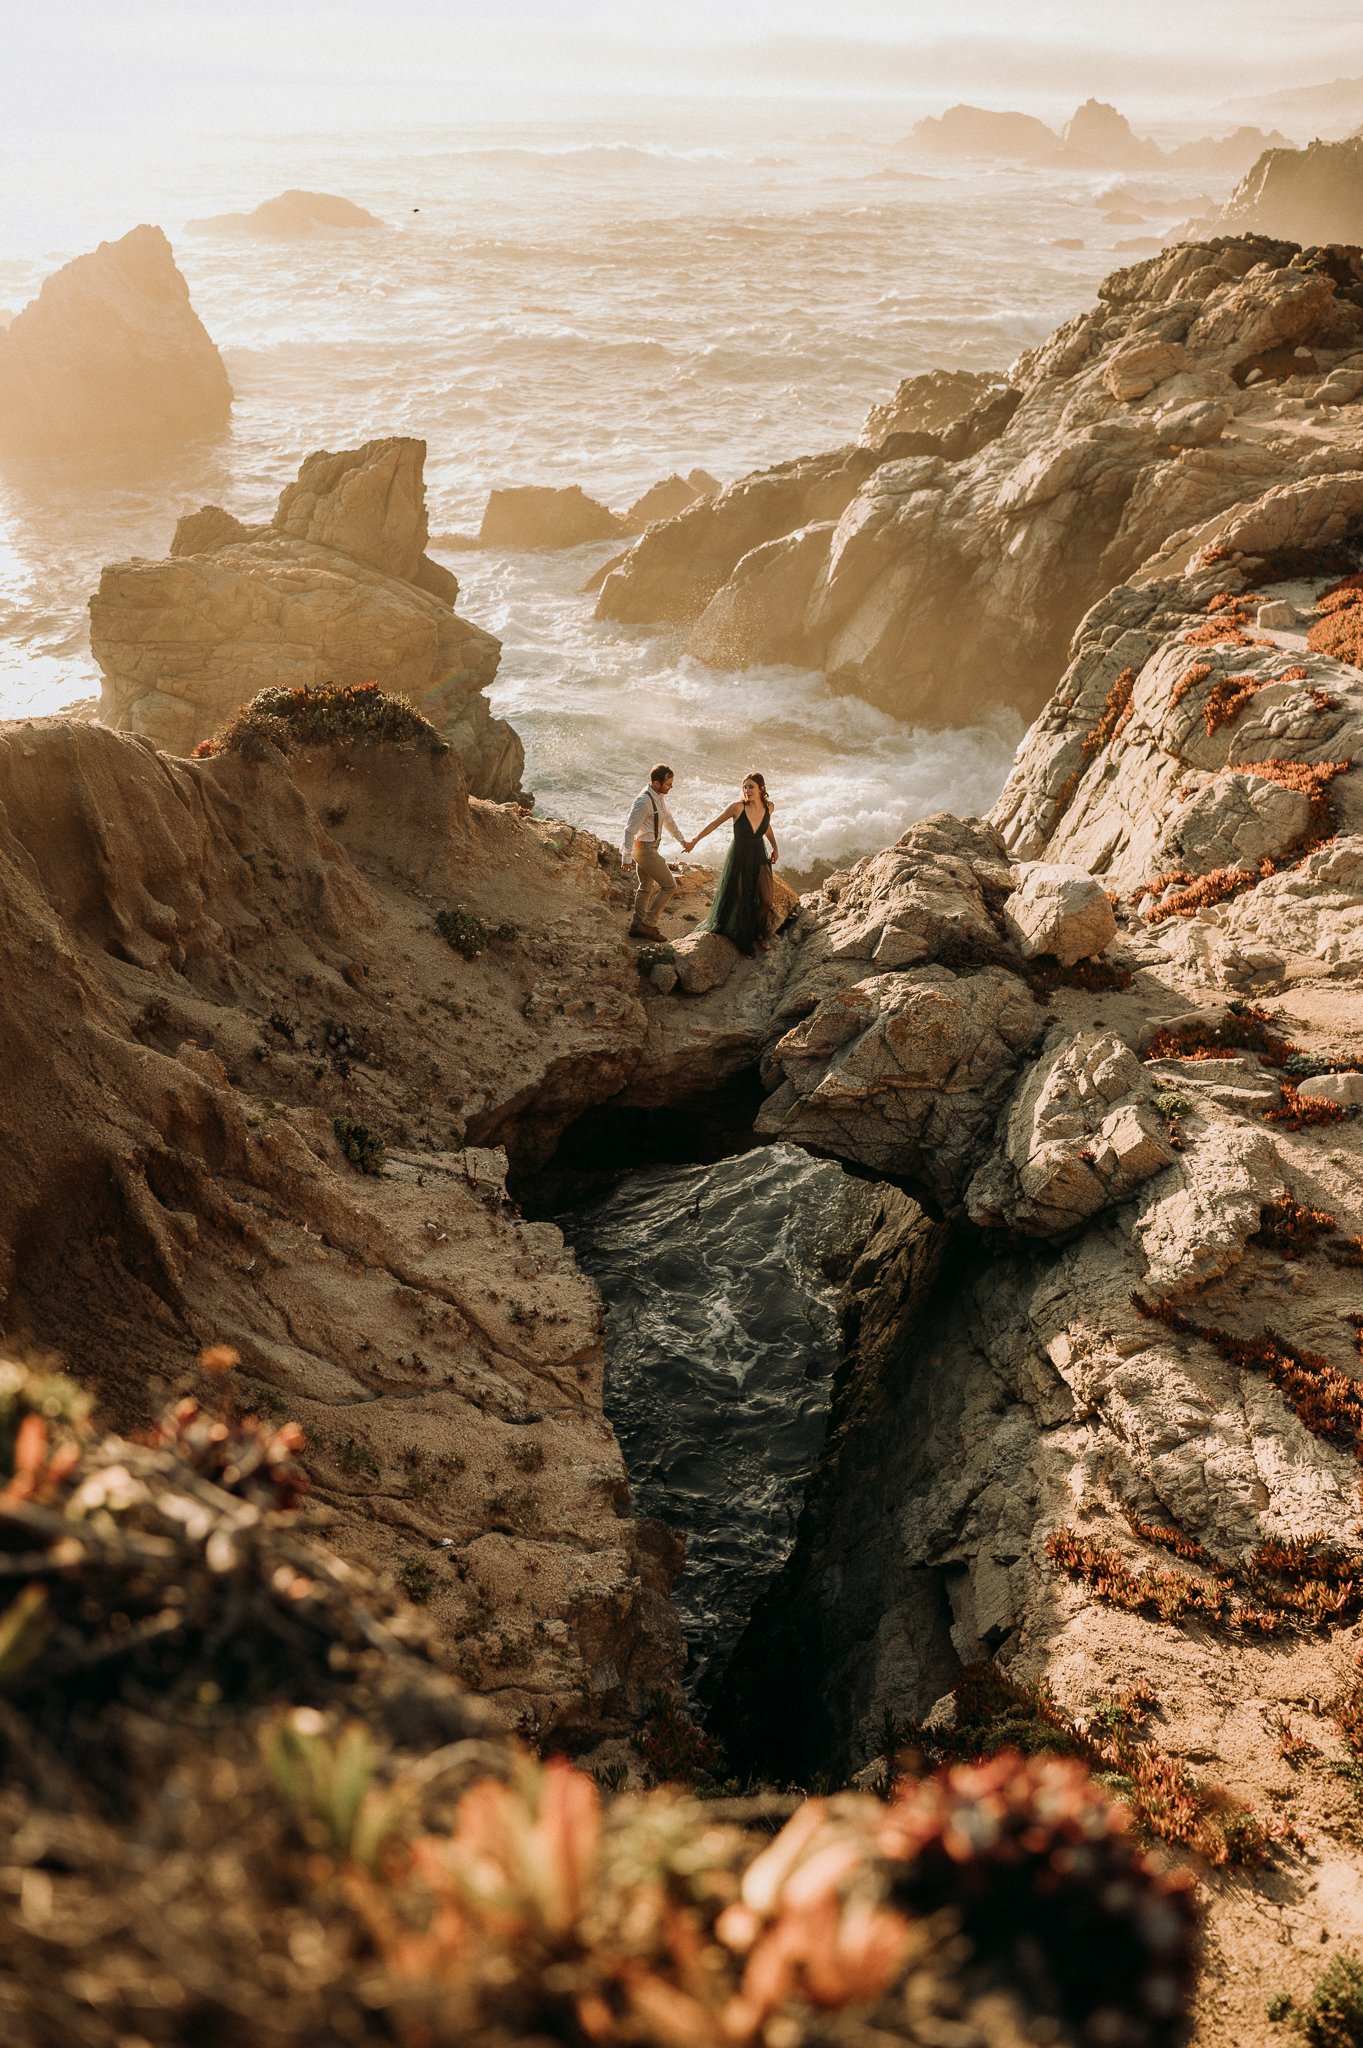 Newly engaged couple at Big Sur, California on cliffs with Pacific Ocean waves behind them